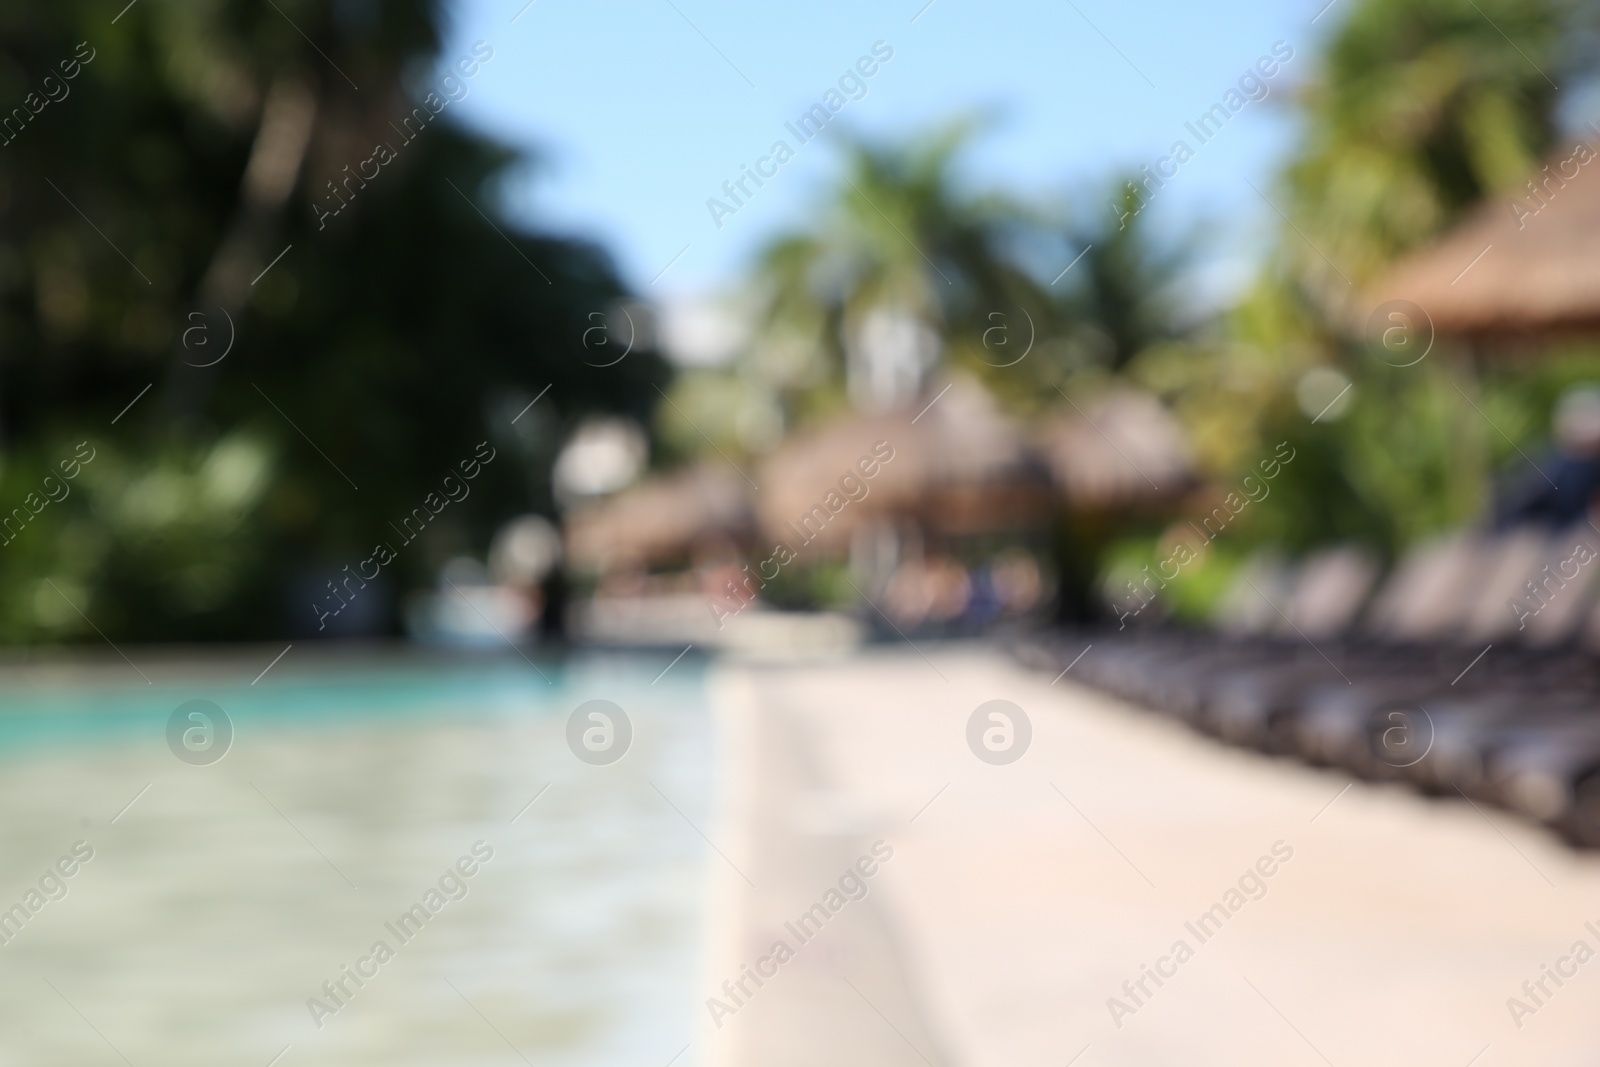 Photo of Blurred view of outdoor swimming pool at resort on sunny day